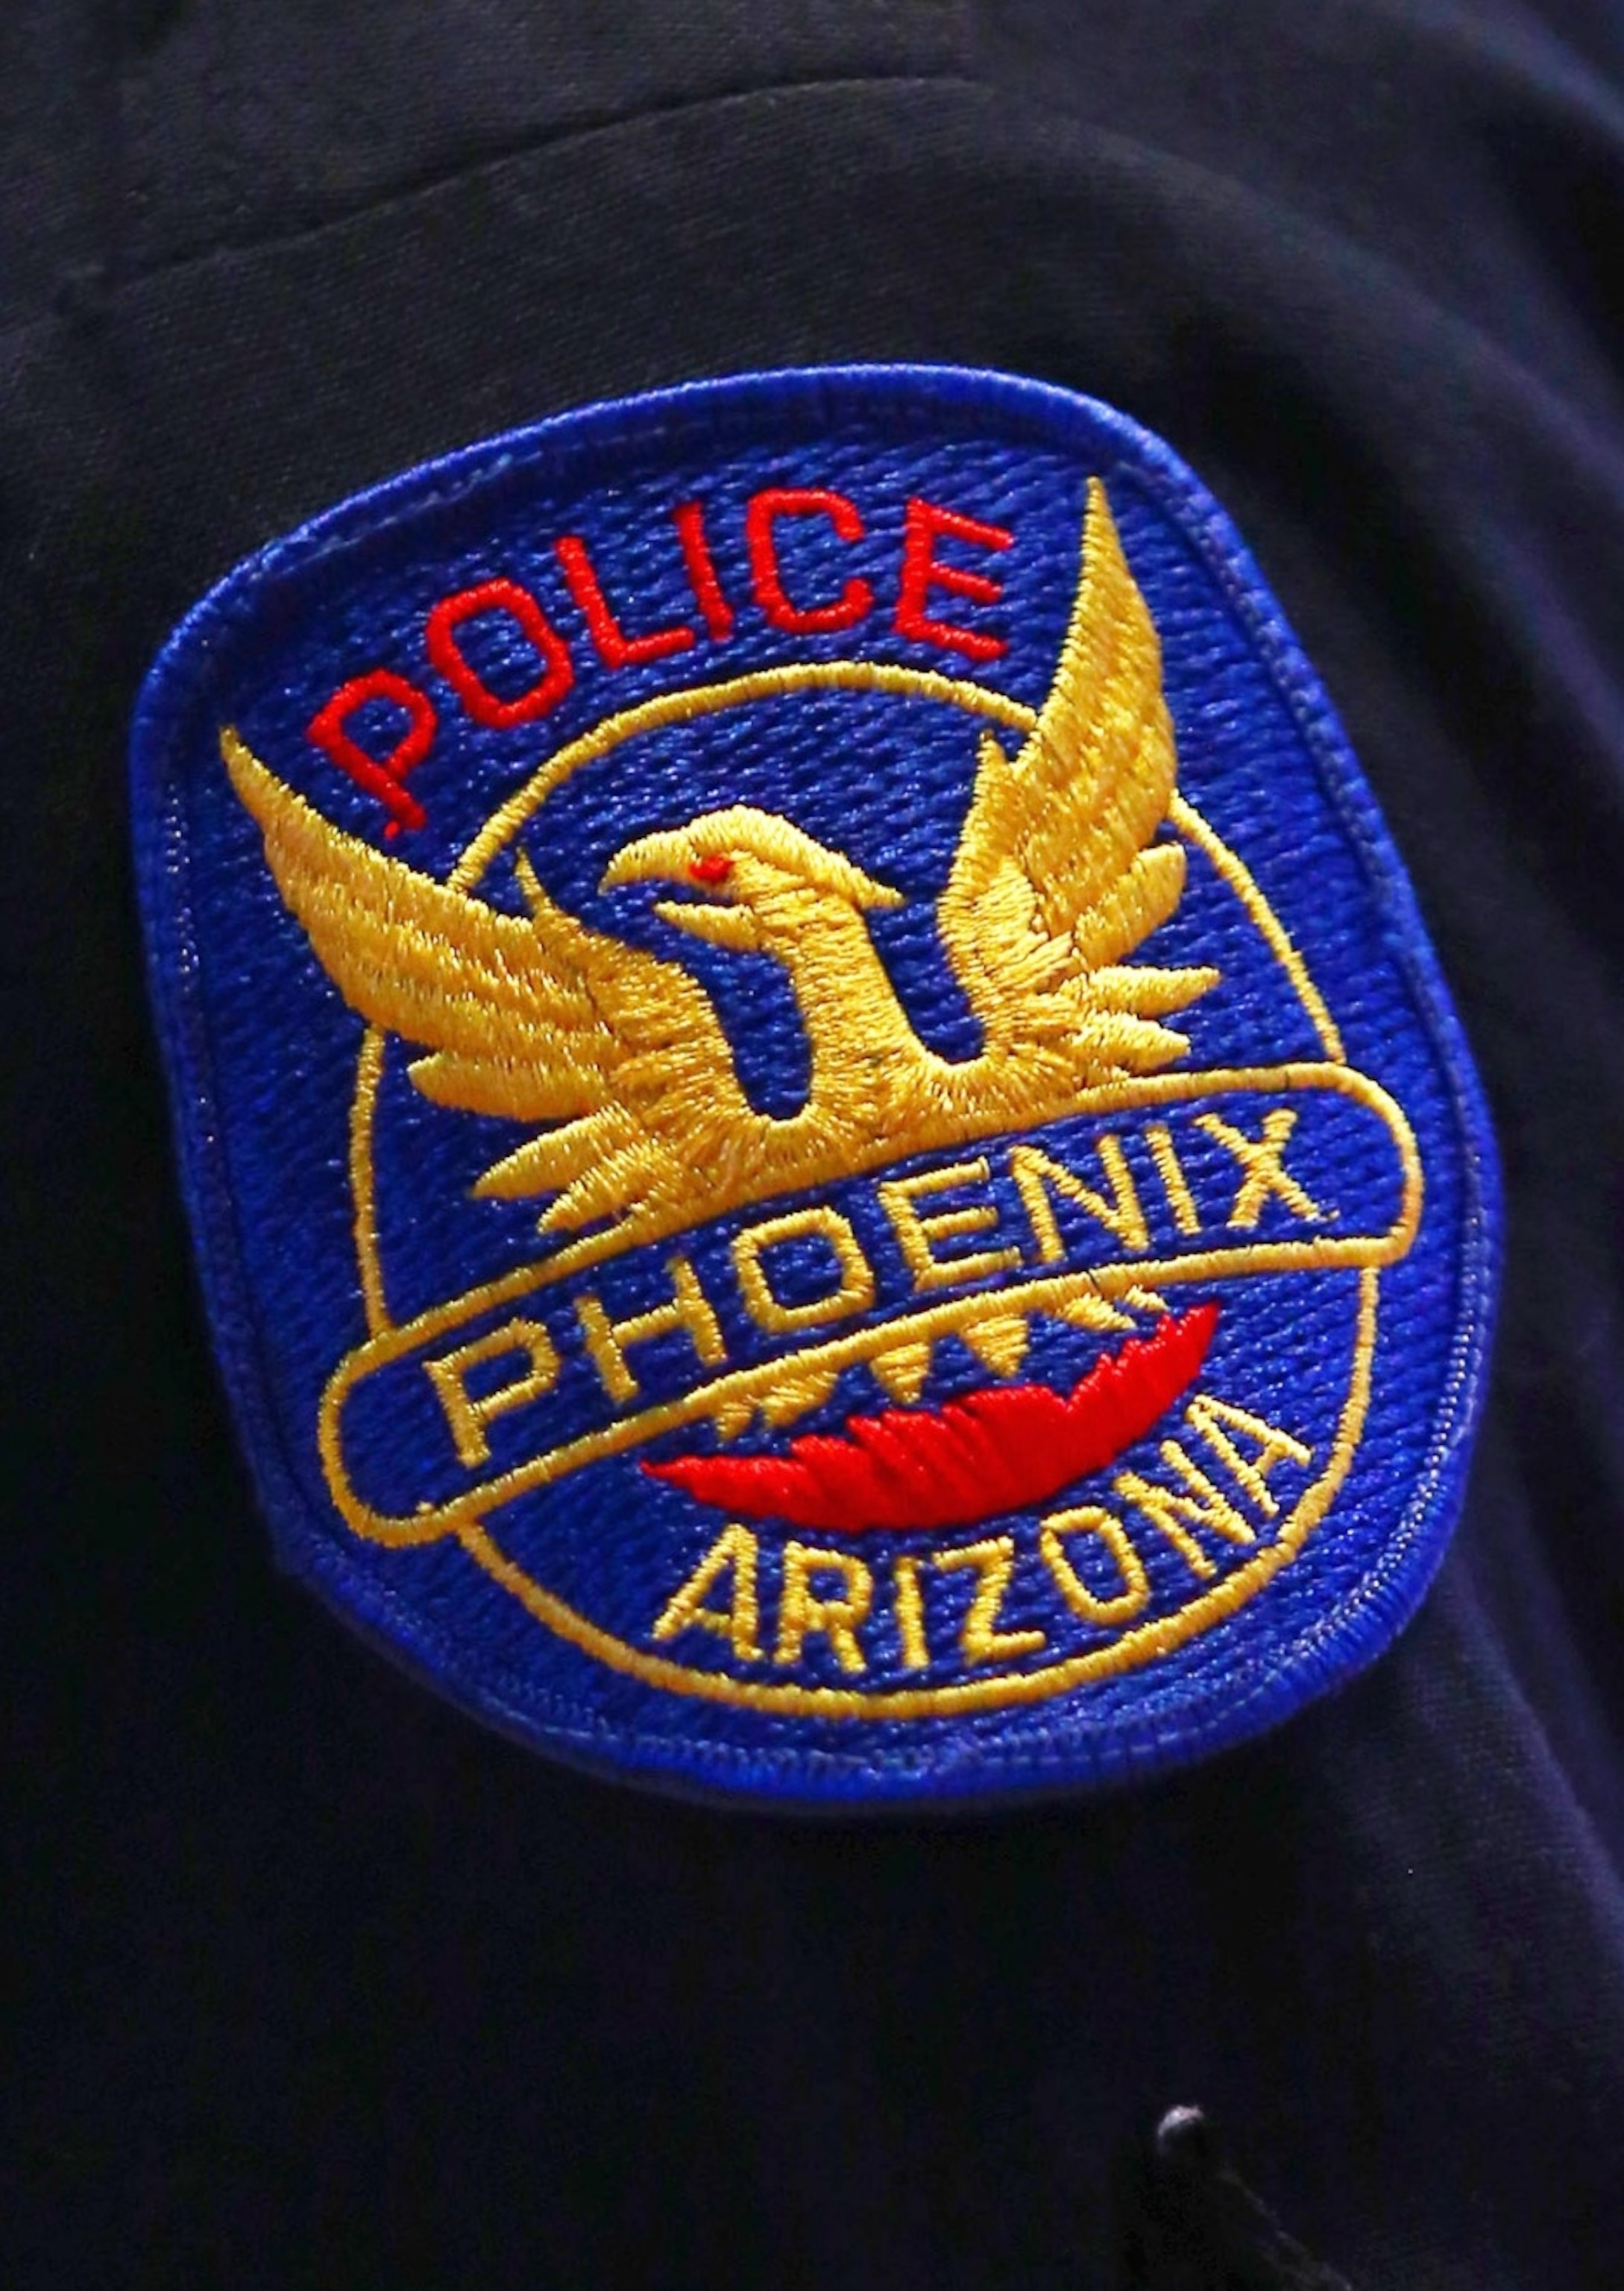 PHOTO: In this March 6, 2014, file photo, the Phoenix police department logo is shown in Phoenix, Arizona.